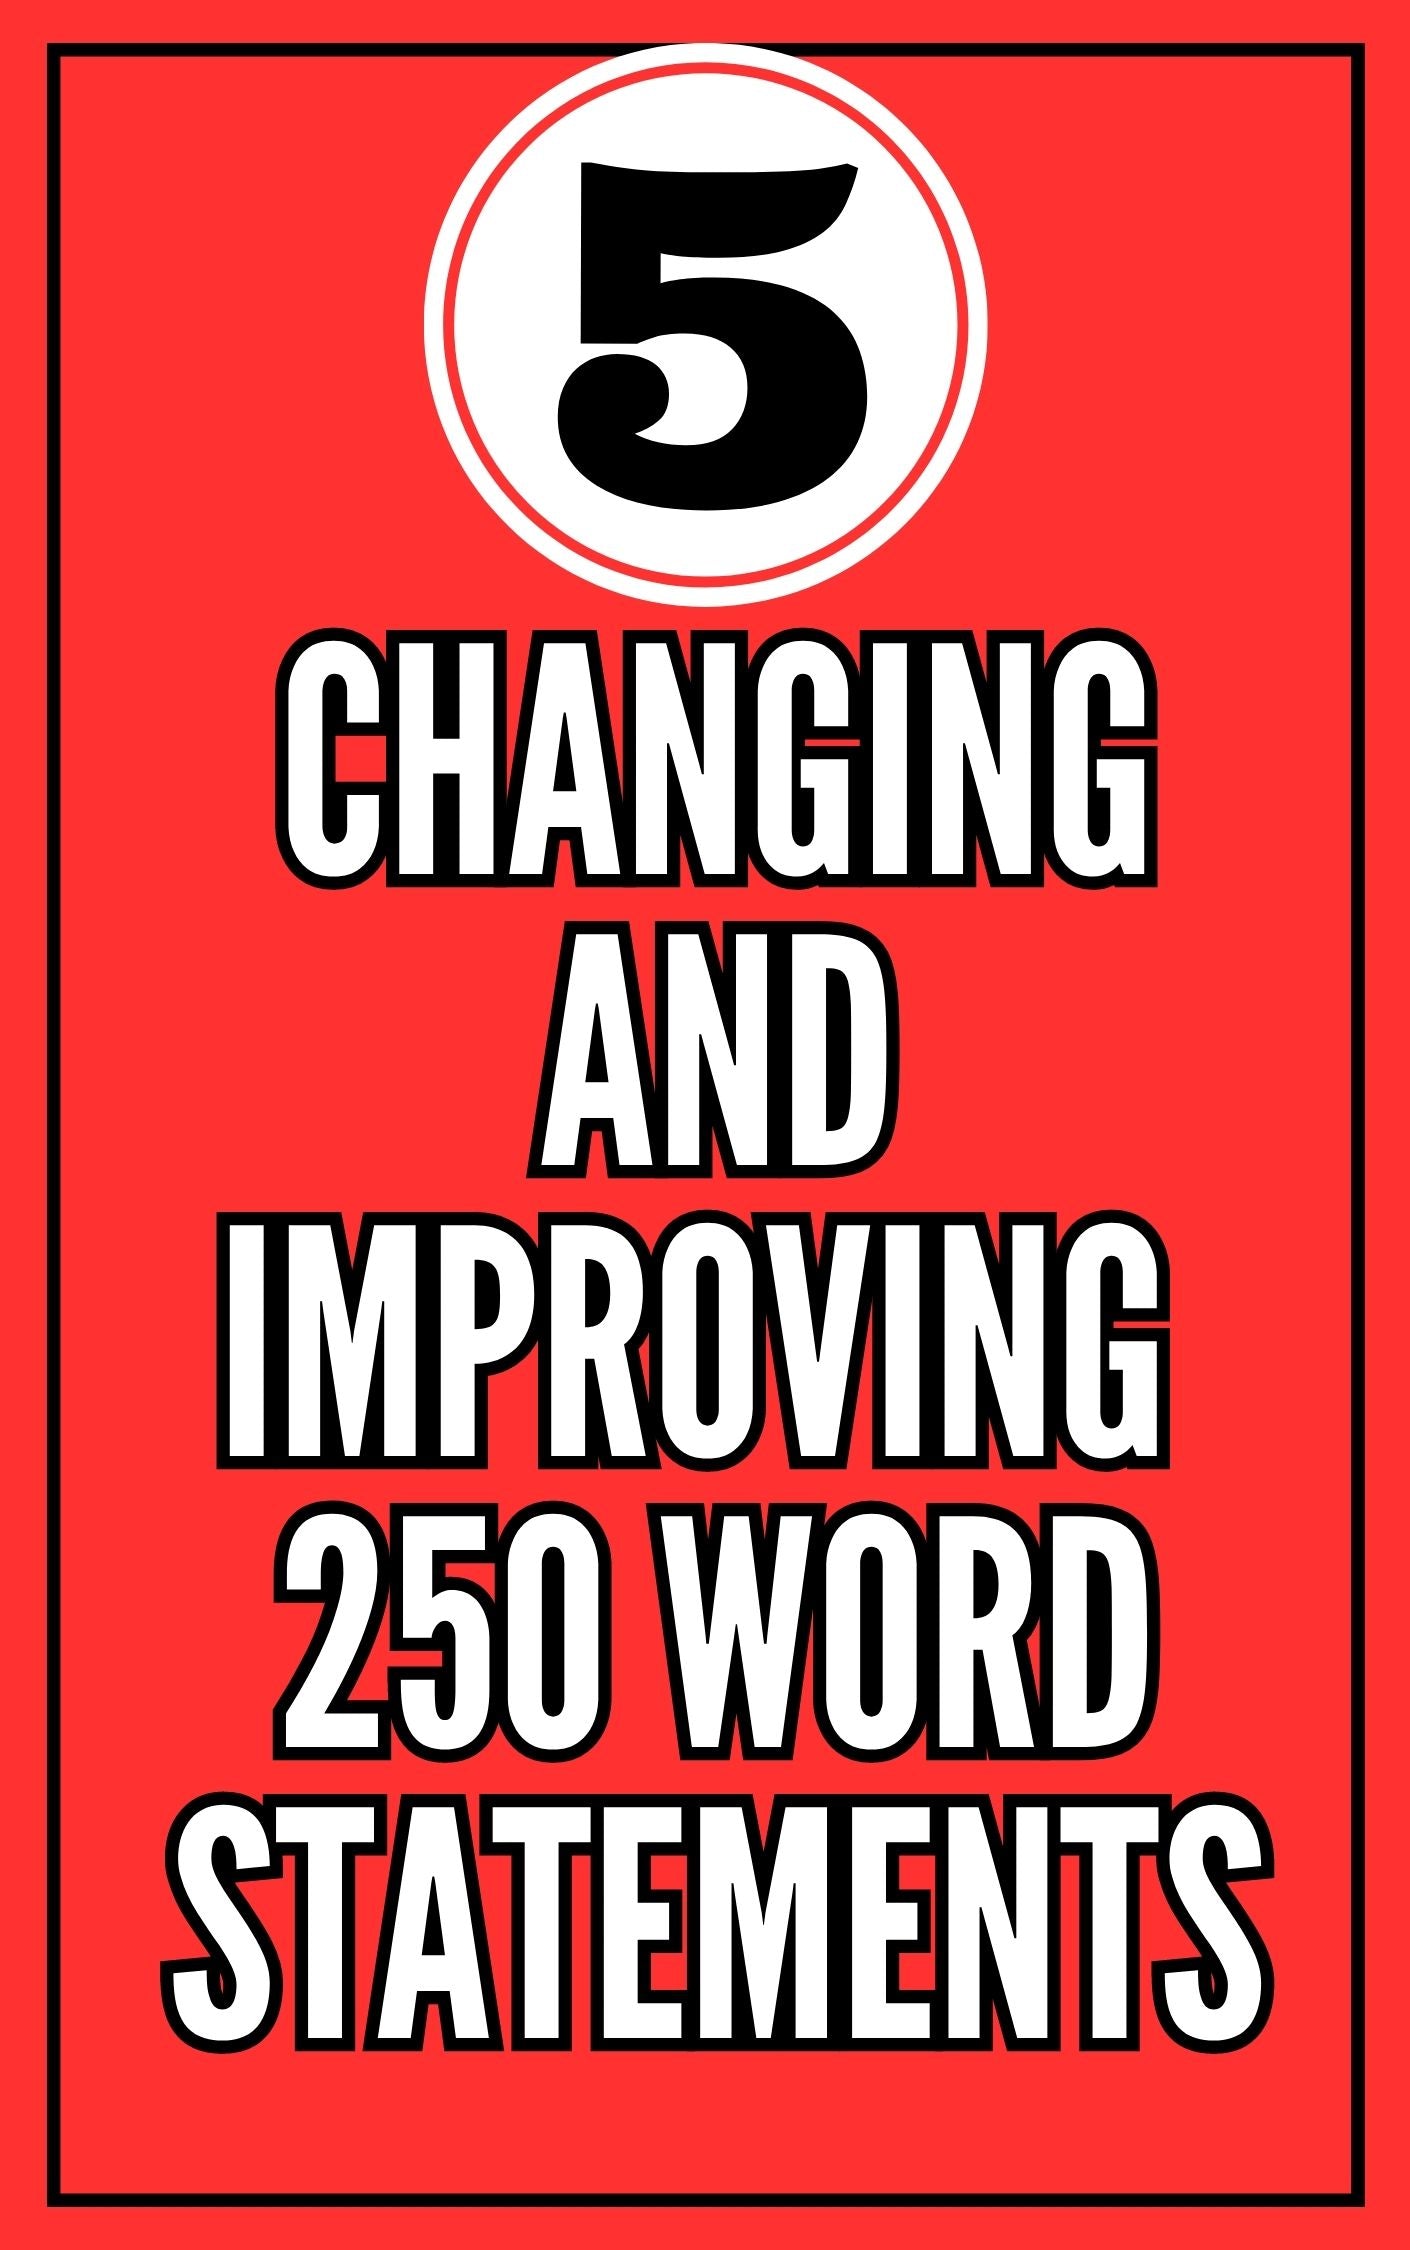 'Changing and Improving' - 250 Word Statement Examples